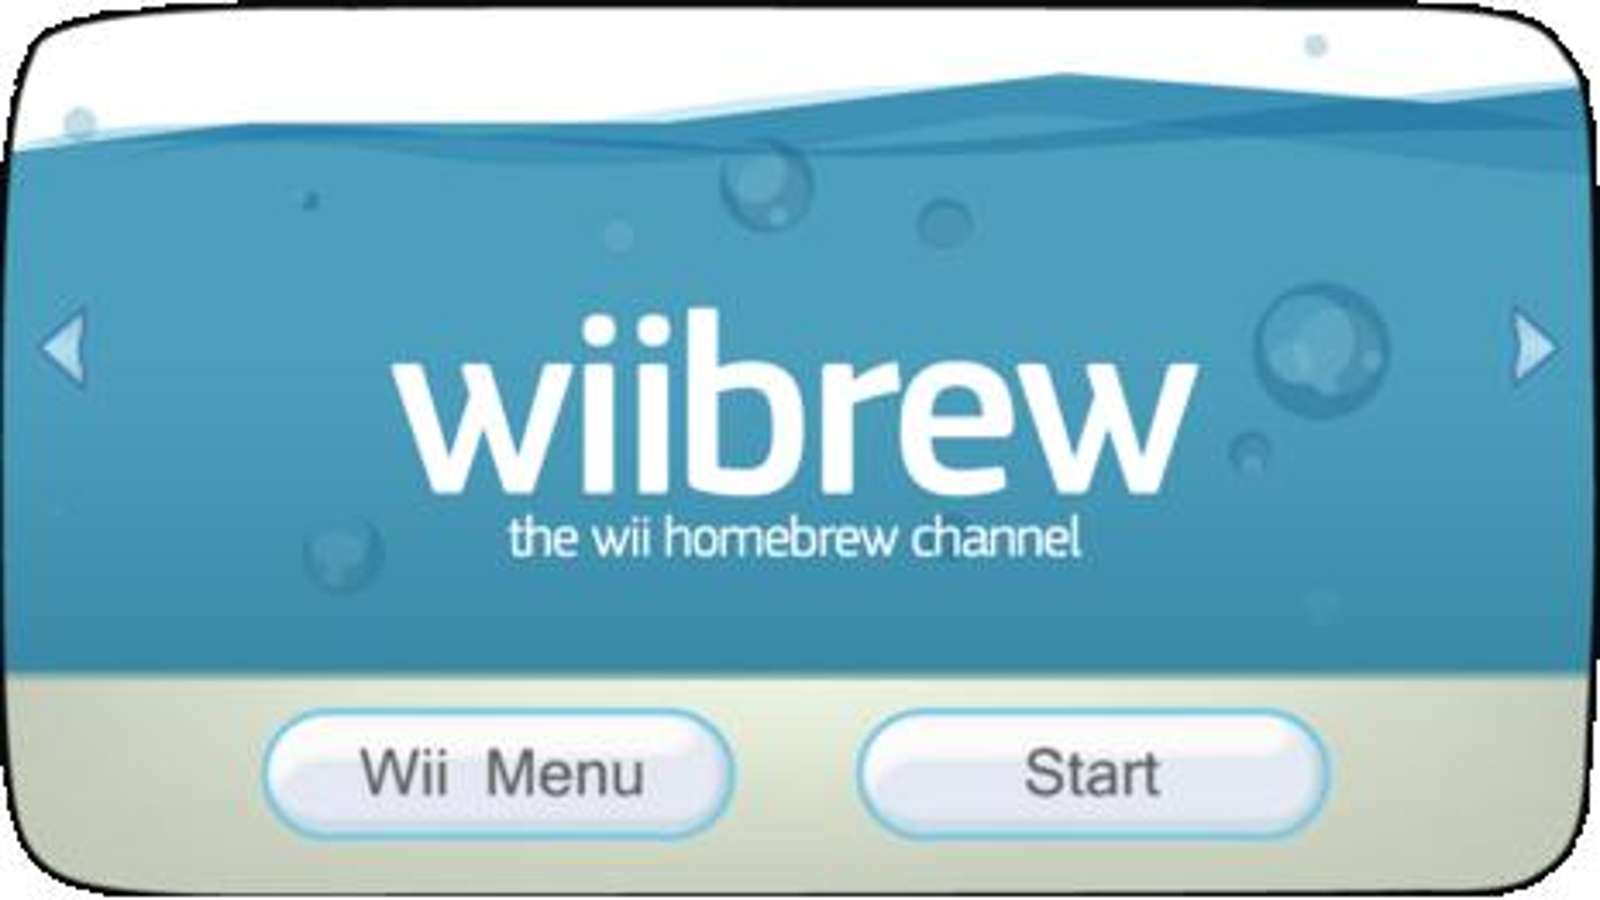 playing wii games on homebrew channel